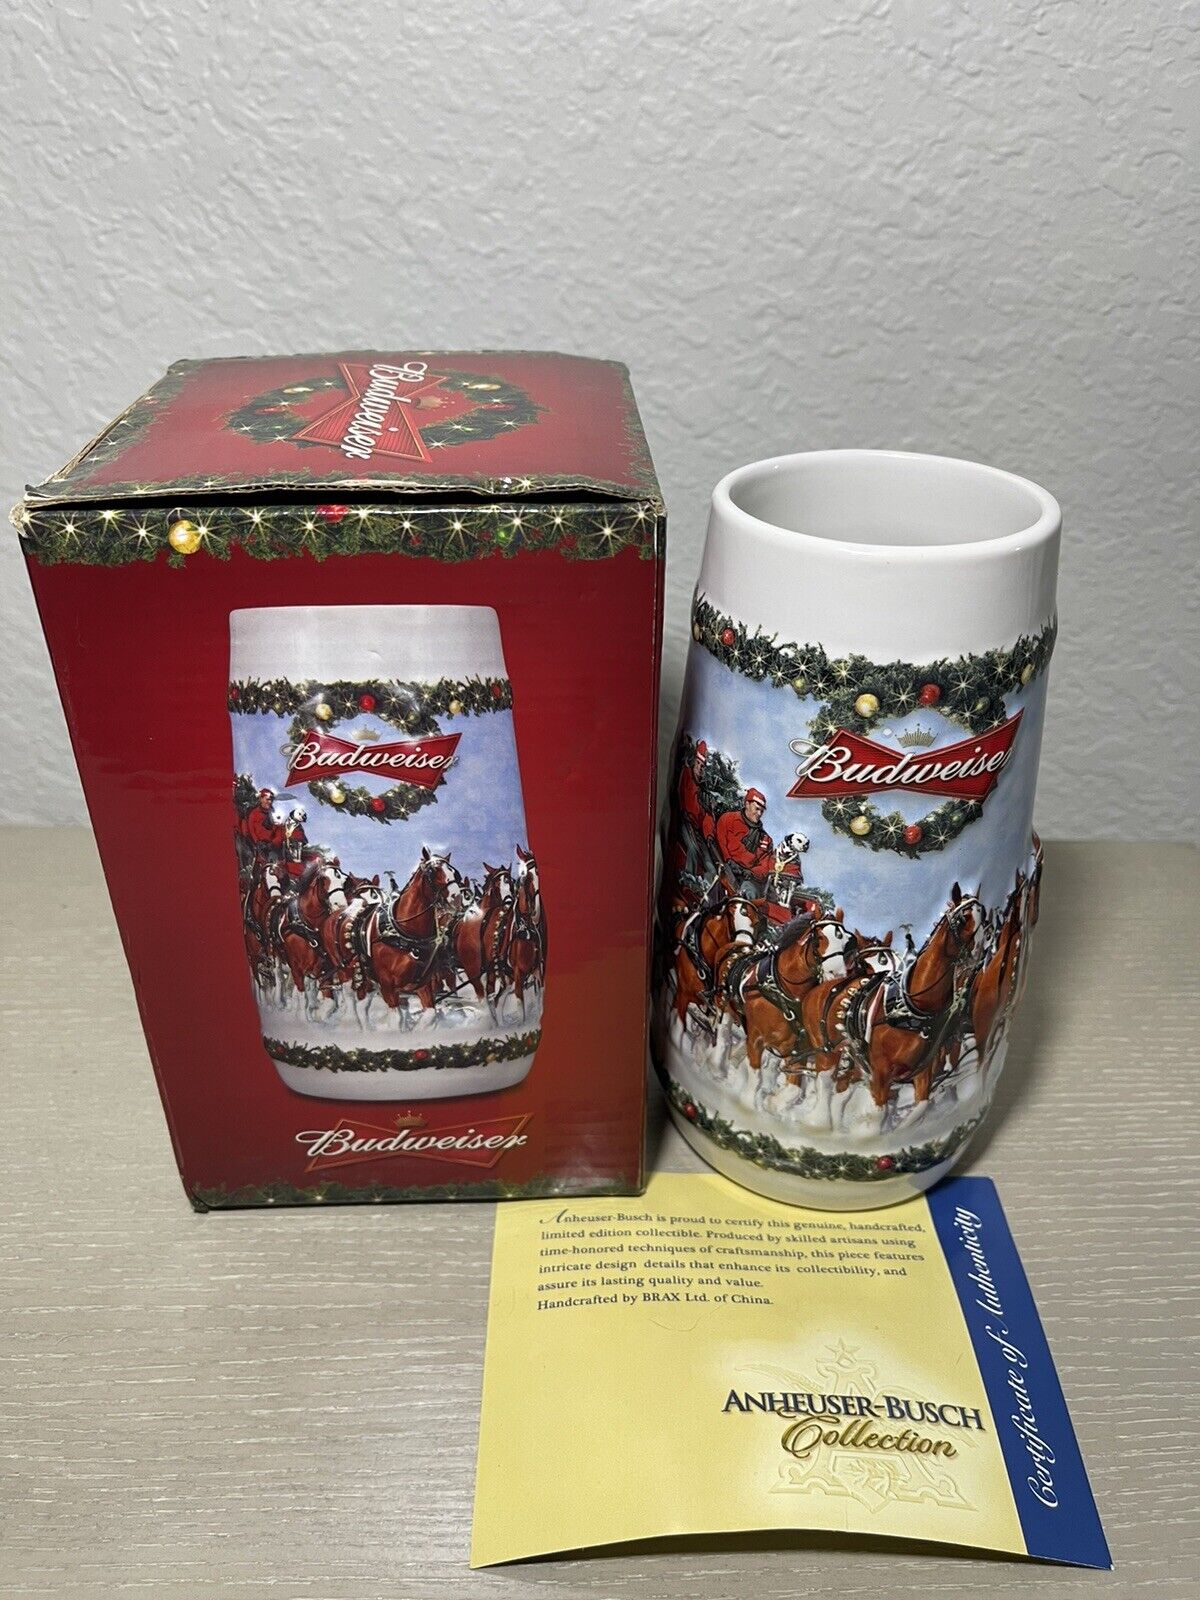 Budweiser (2009) Clydesdales Holiday tradition ceramic Stein 